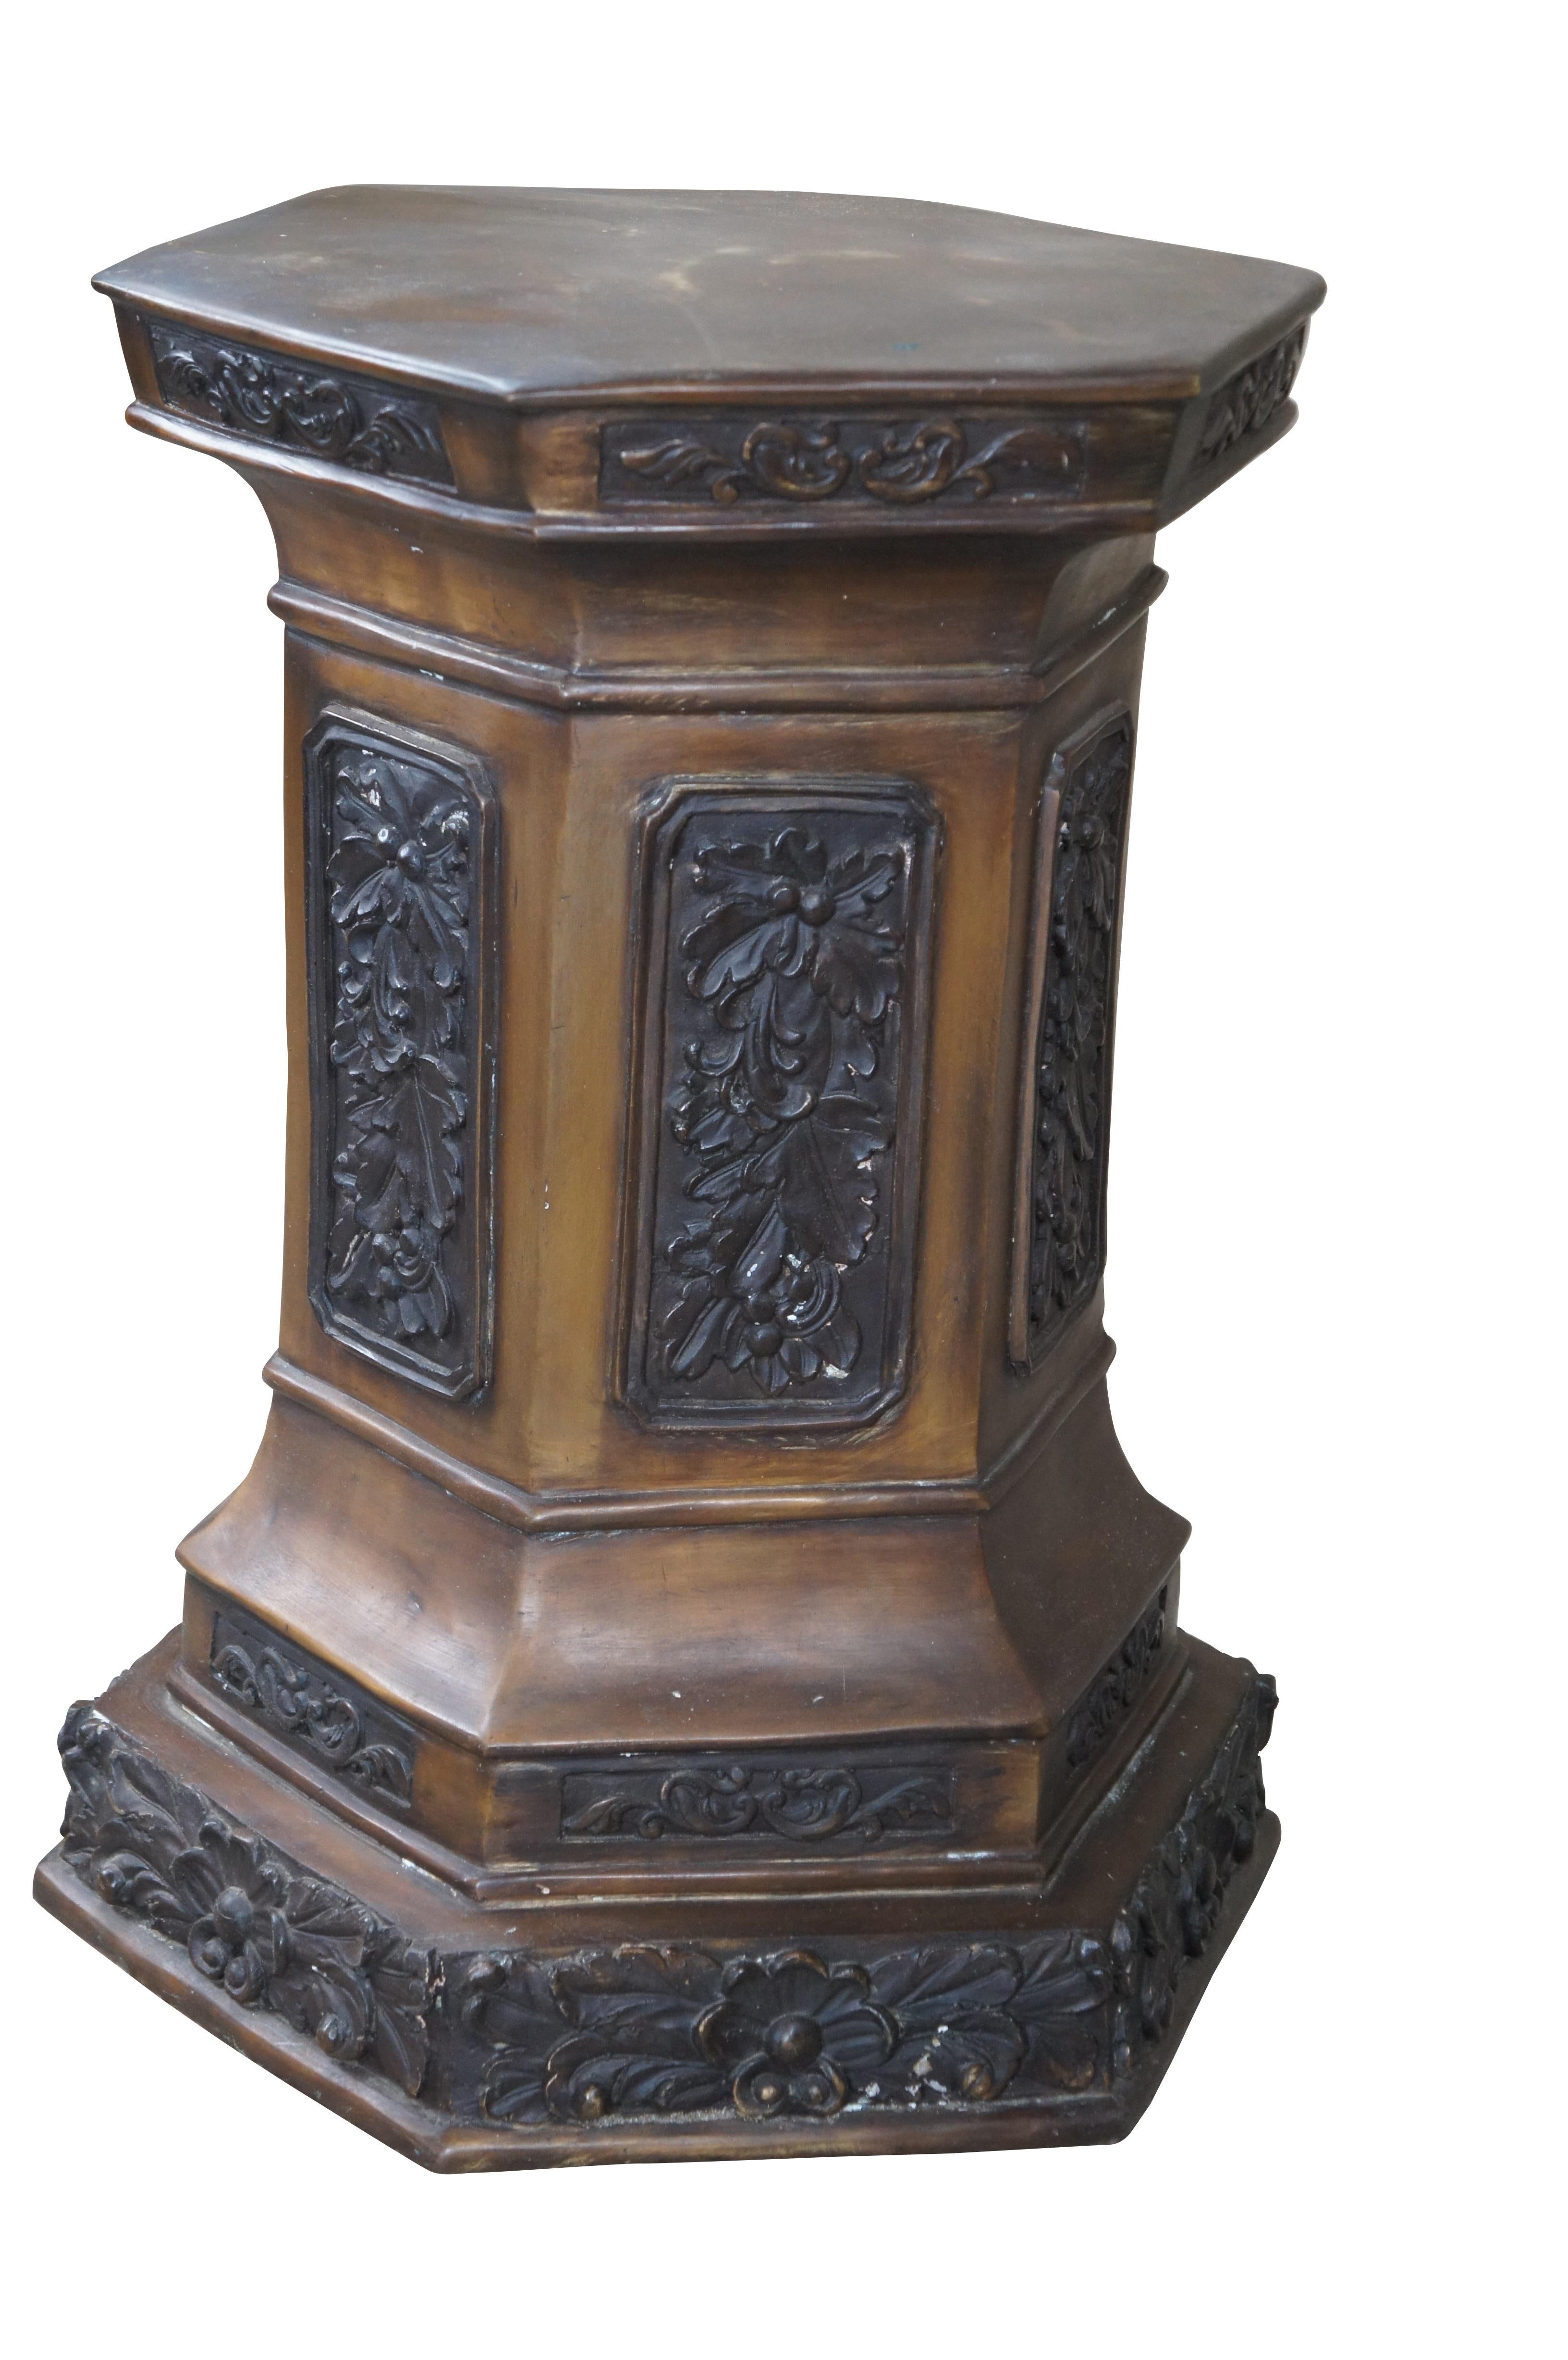 Late 20th Century Renaissance Revival pedestal, sculpture or plant stand. Features a hexagon form made from bronze with low relief foliate panels.

Dimensions:
15